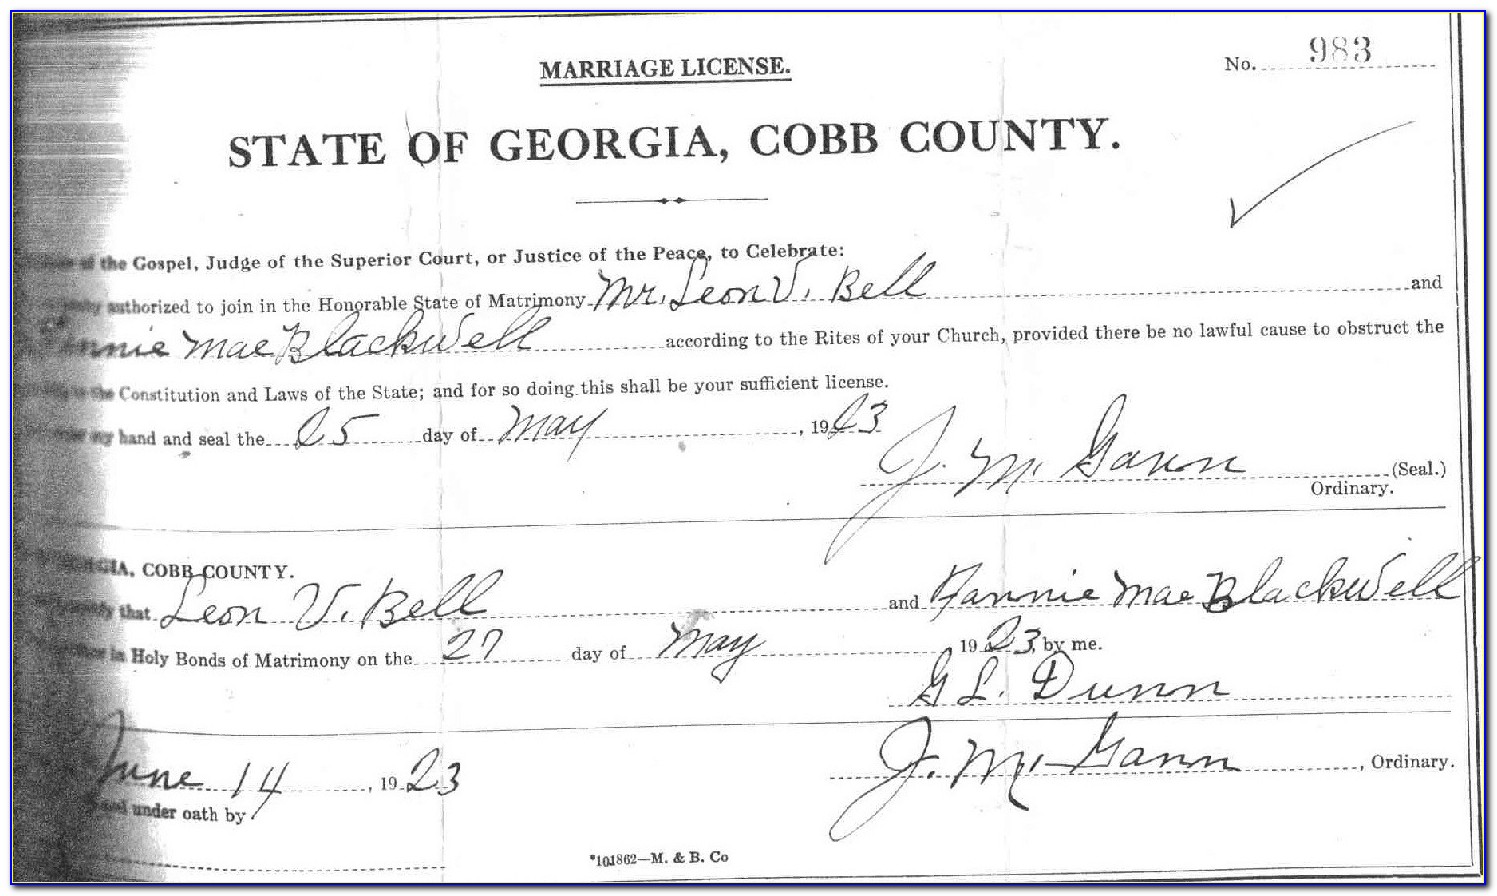 Cobb County Birth Certificate Office